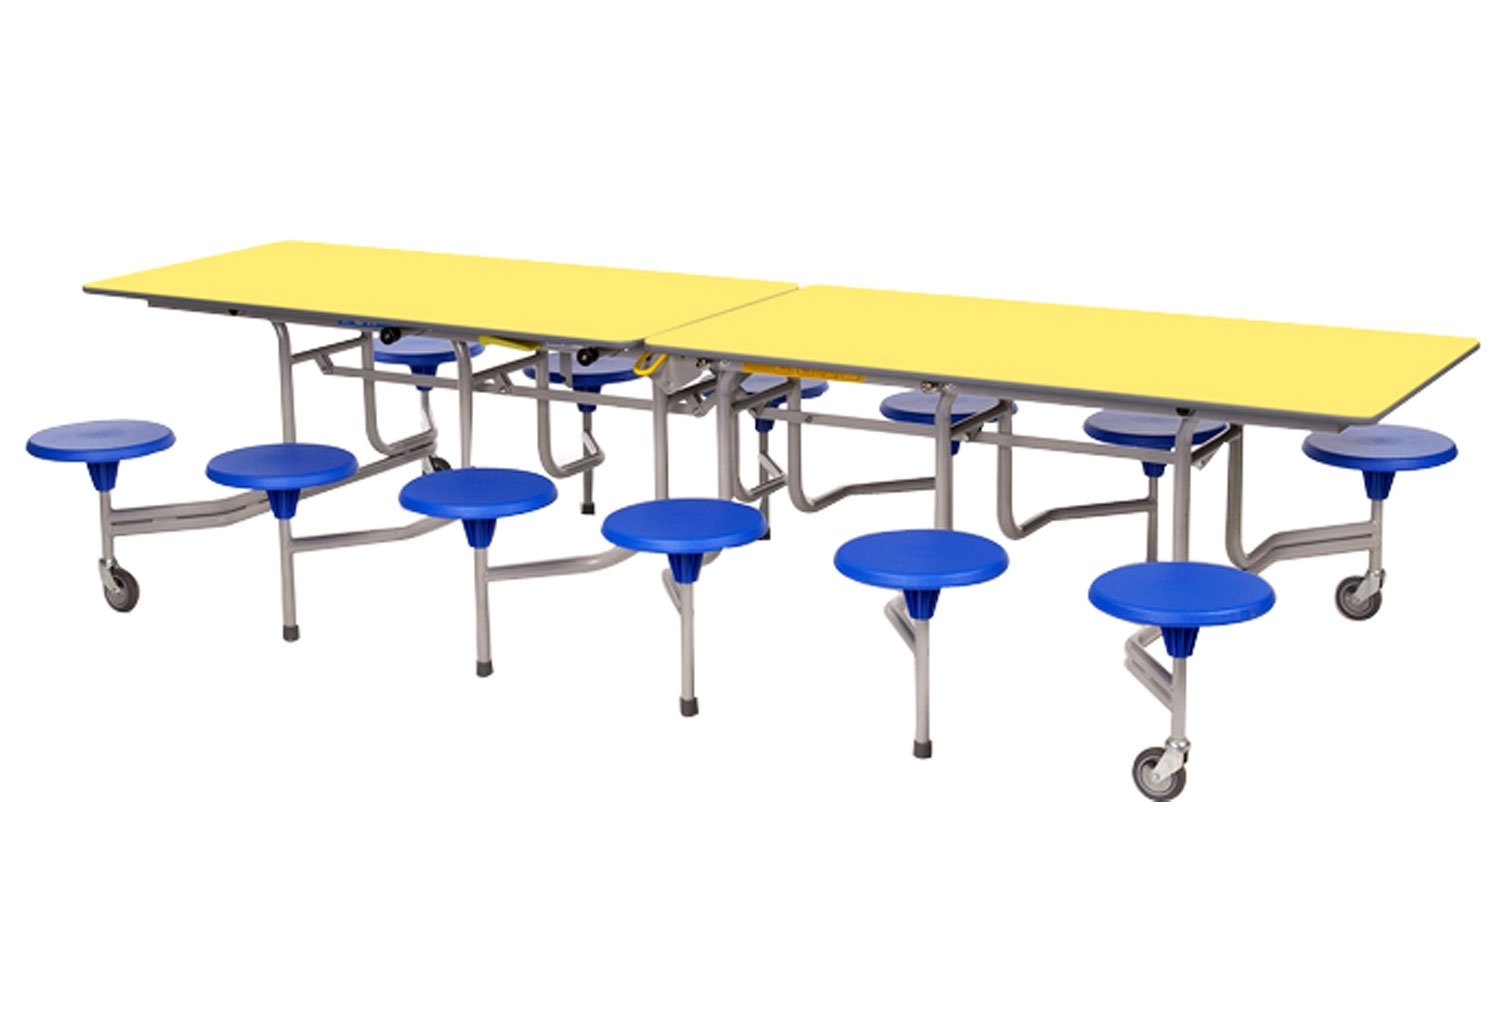 Sico Rectangular Table Seating Unit With 12 Seats, 74 (cm), Campanula Top, Blue Seats